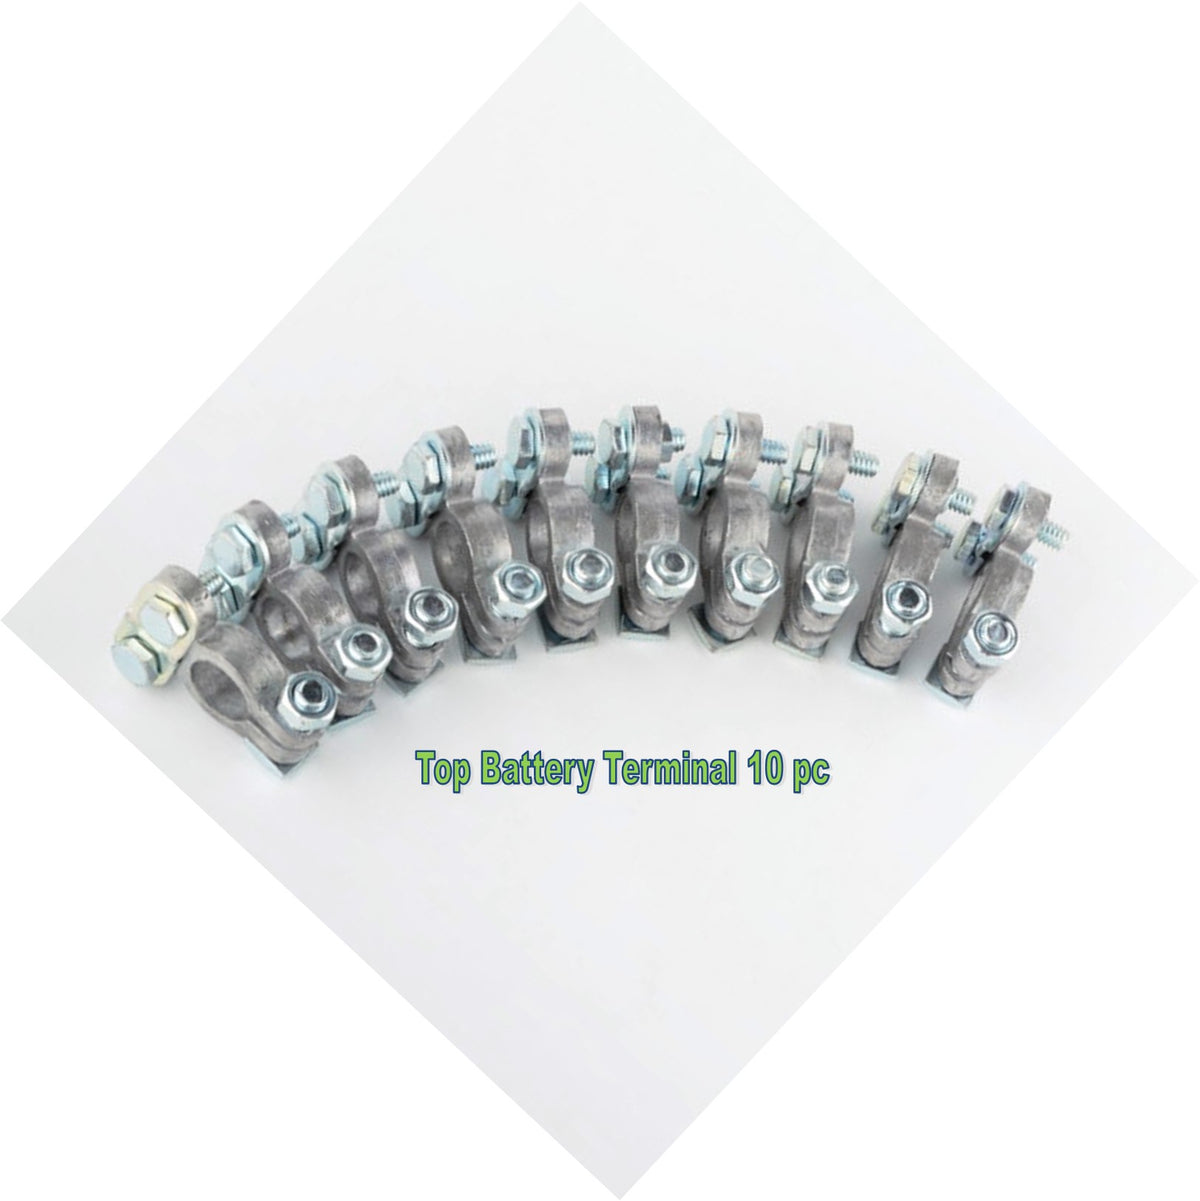 10pc CARD TOP POST BATTERY TERMINAL SOLID LEAD STEEL BOLT CABLE POS NEG